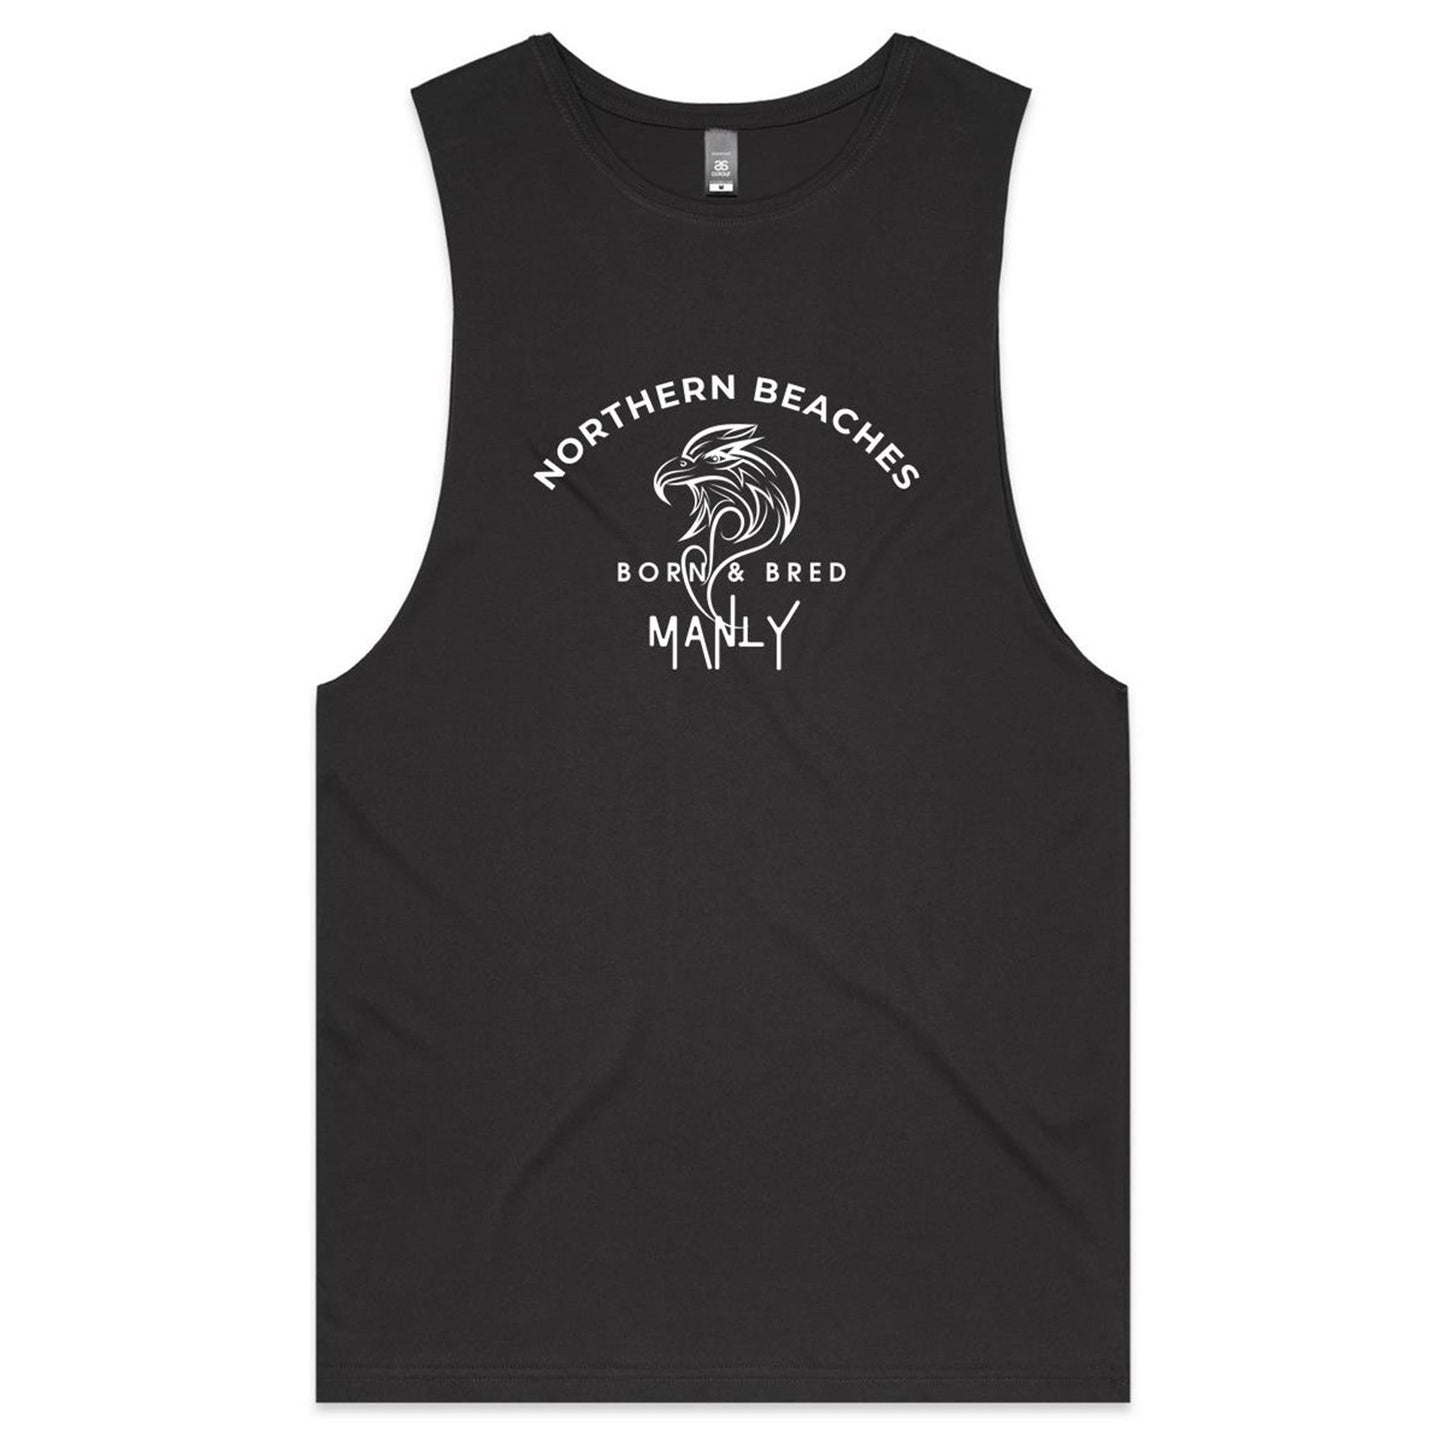 Classic cotton Tank Northern Beaches logo design - Lost Manly Shop